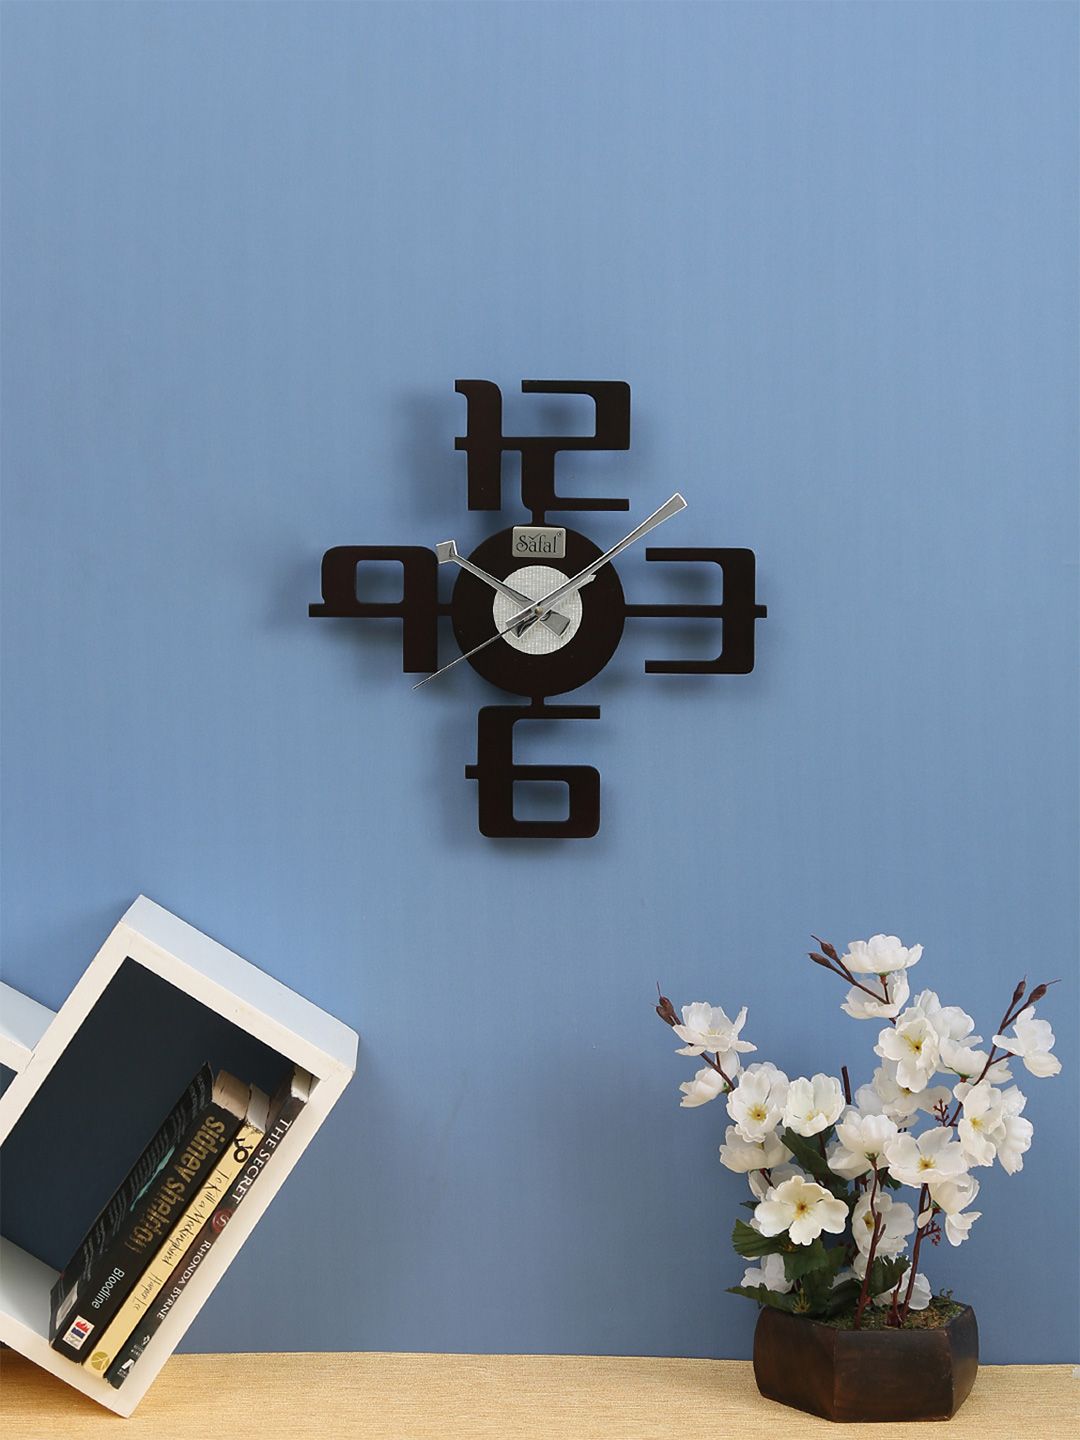 Safal Black Asymmetric Analogue Wall Clock Price in India